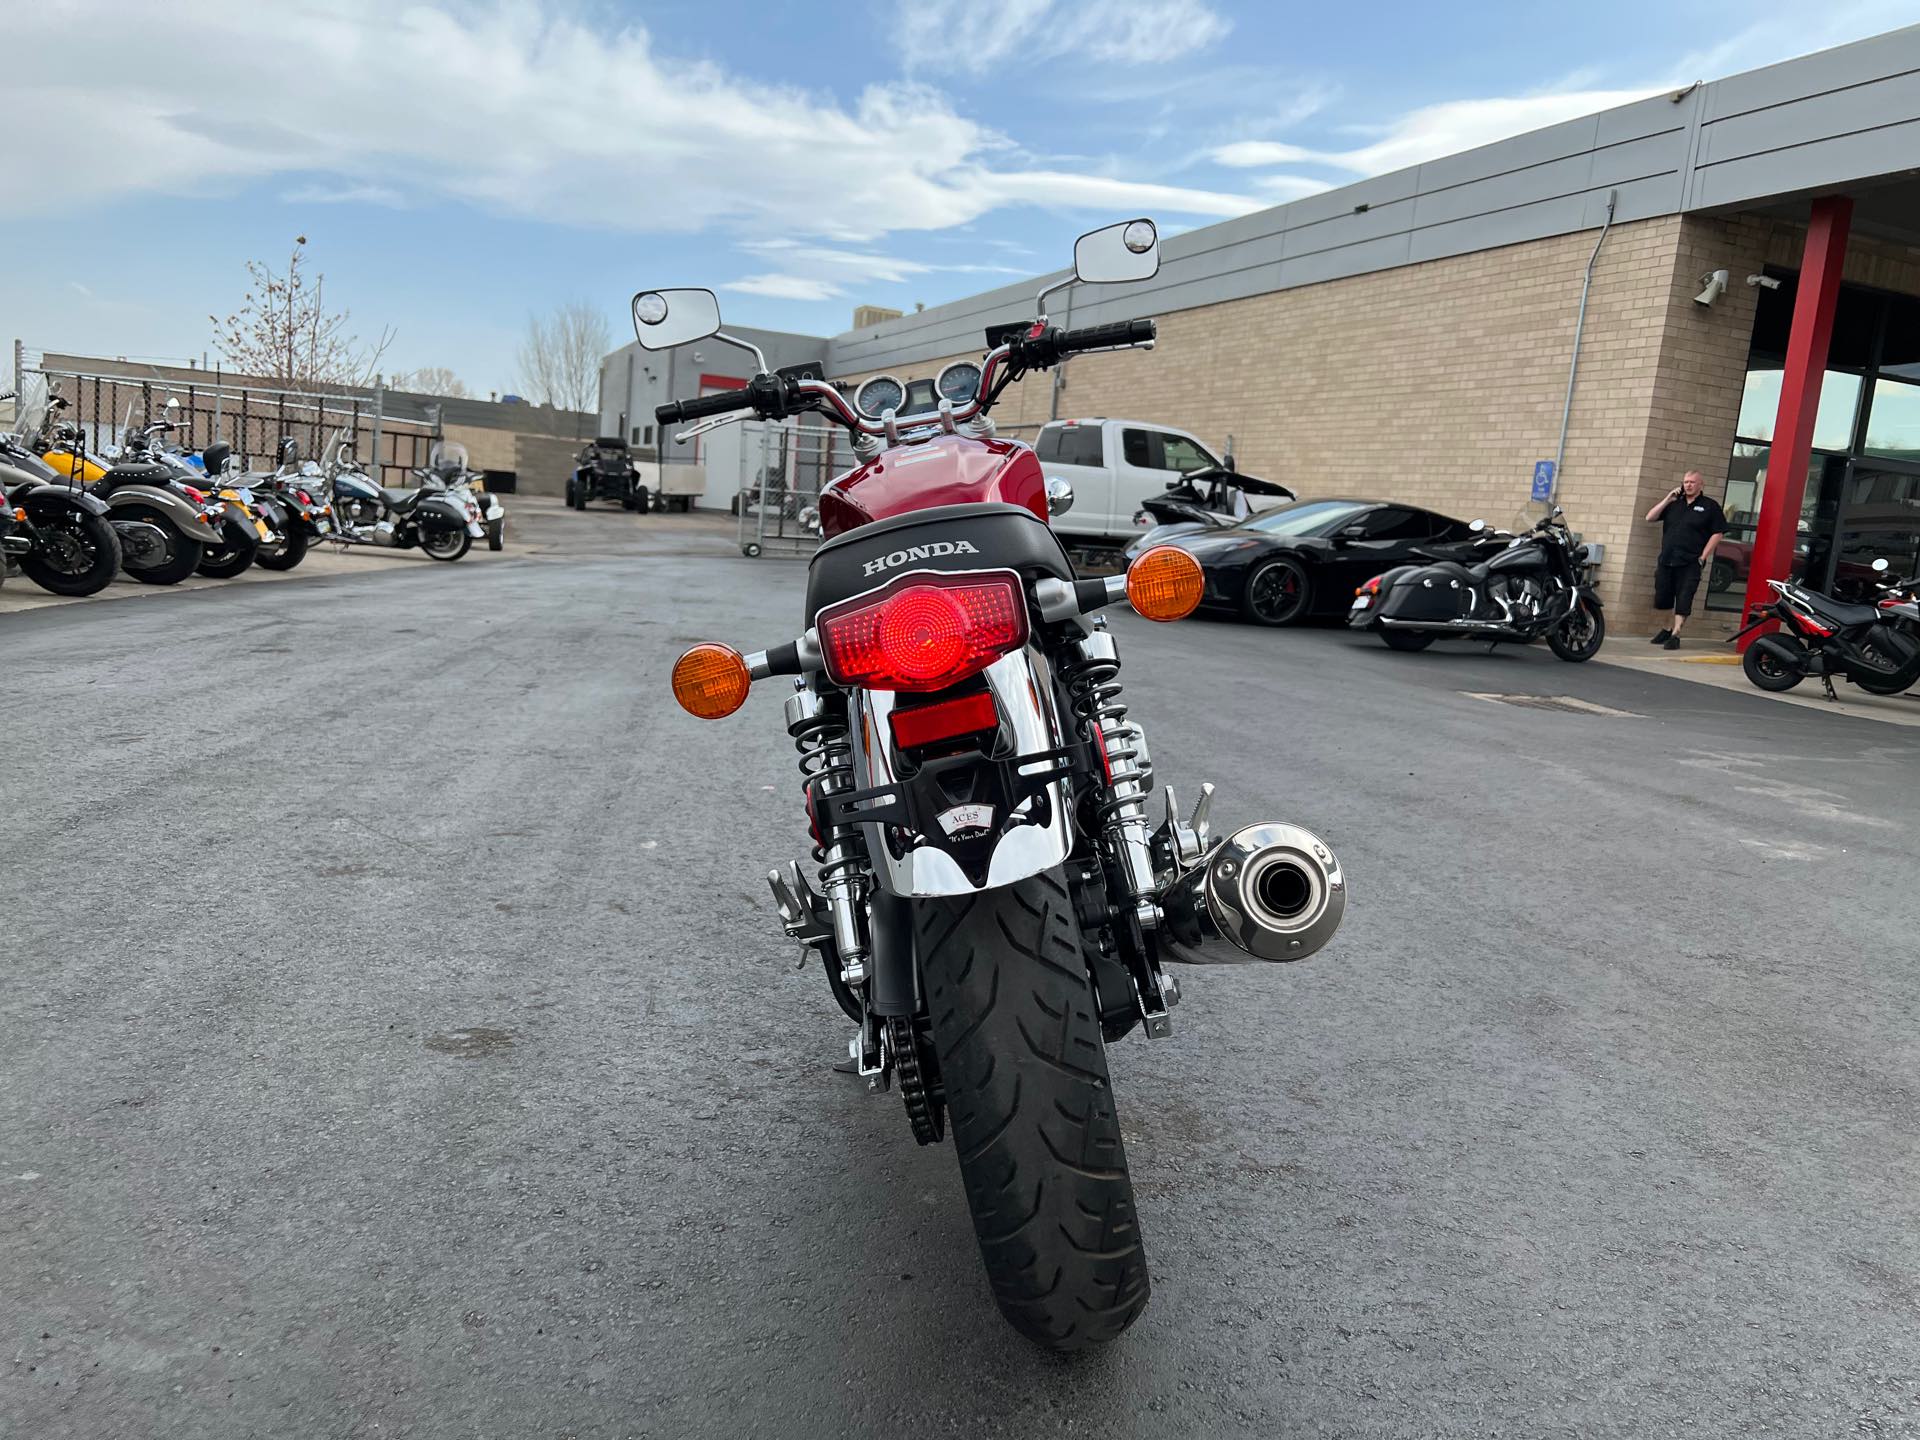 2013 Honda CB 1100 at Aces Motorcycles - Fort Collins